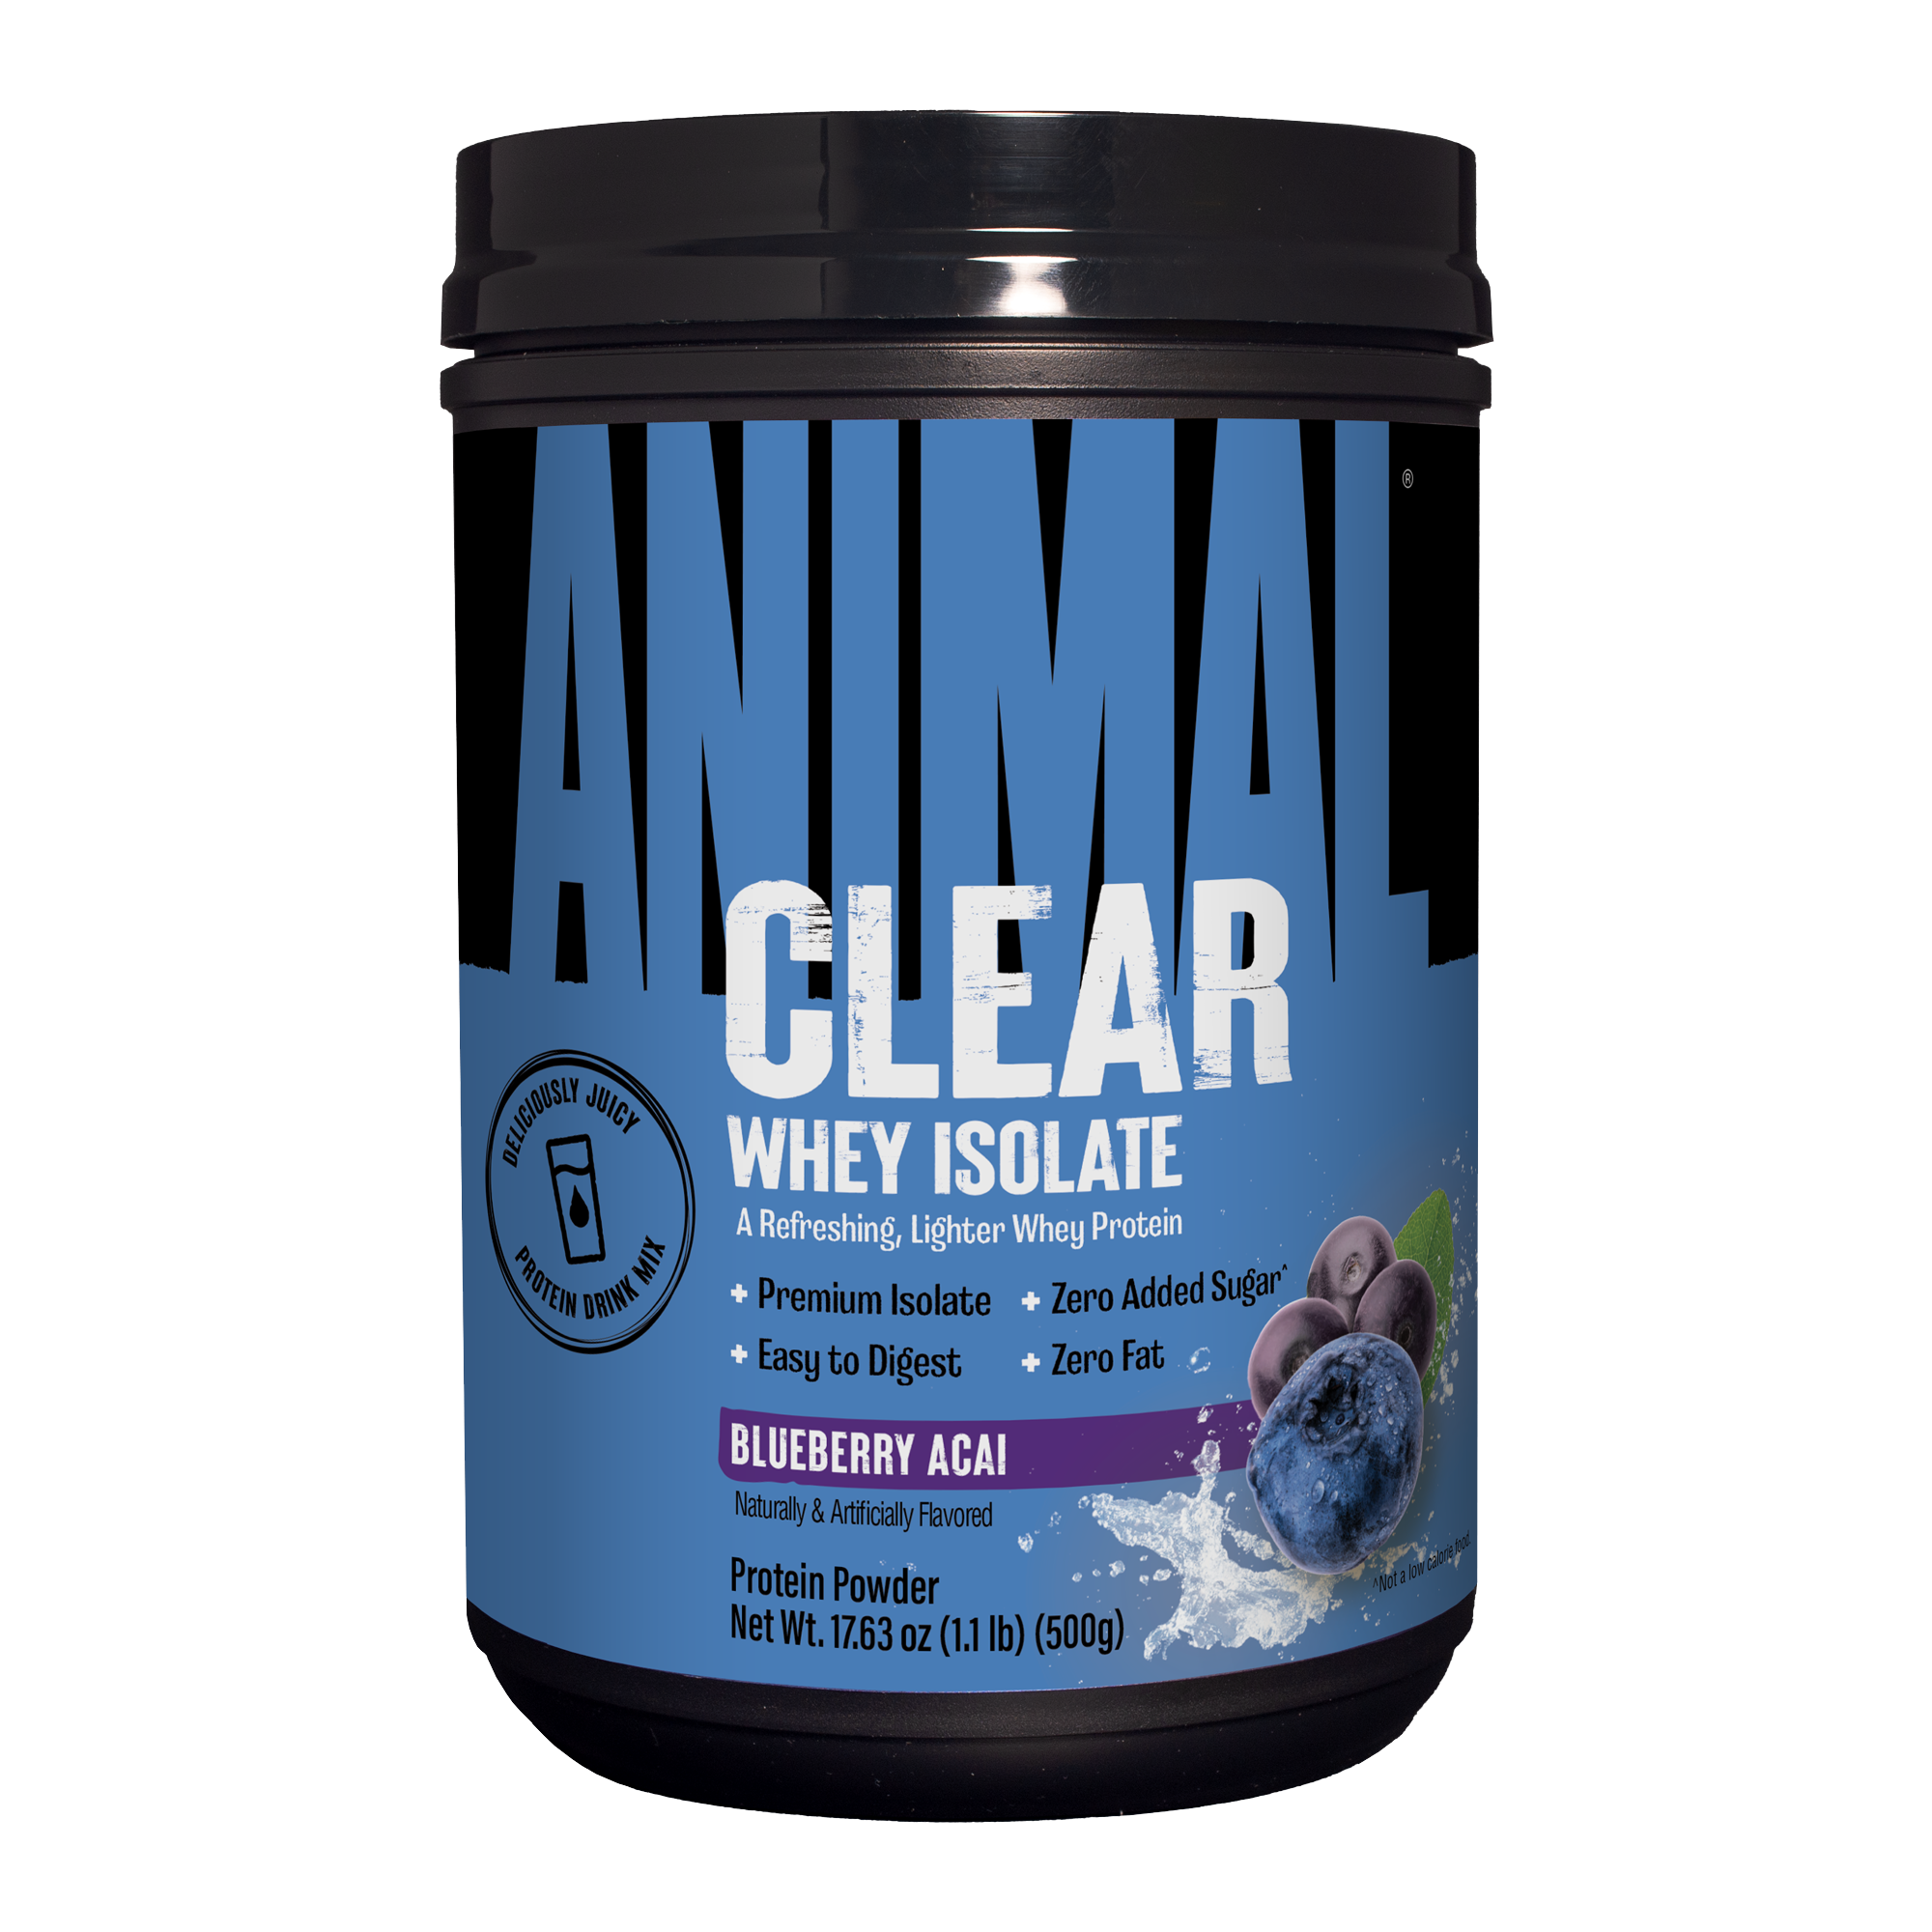 Animal Clear Whey Isolate Protein Powder